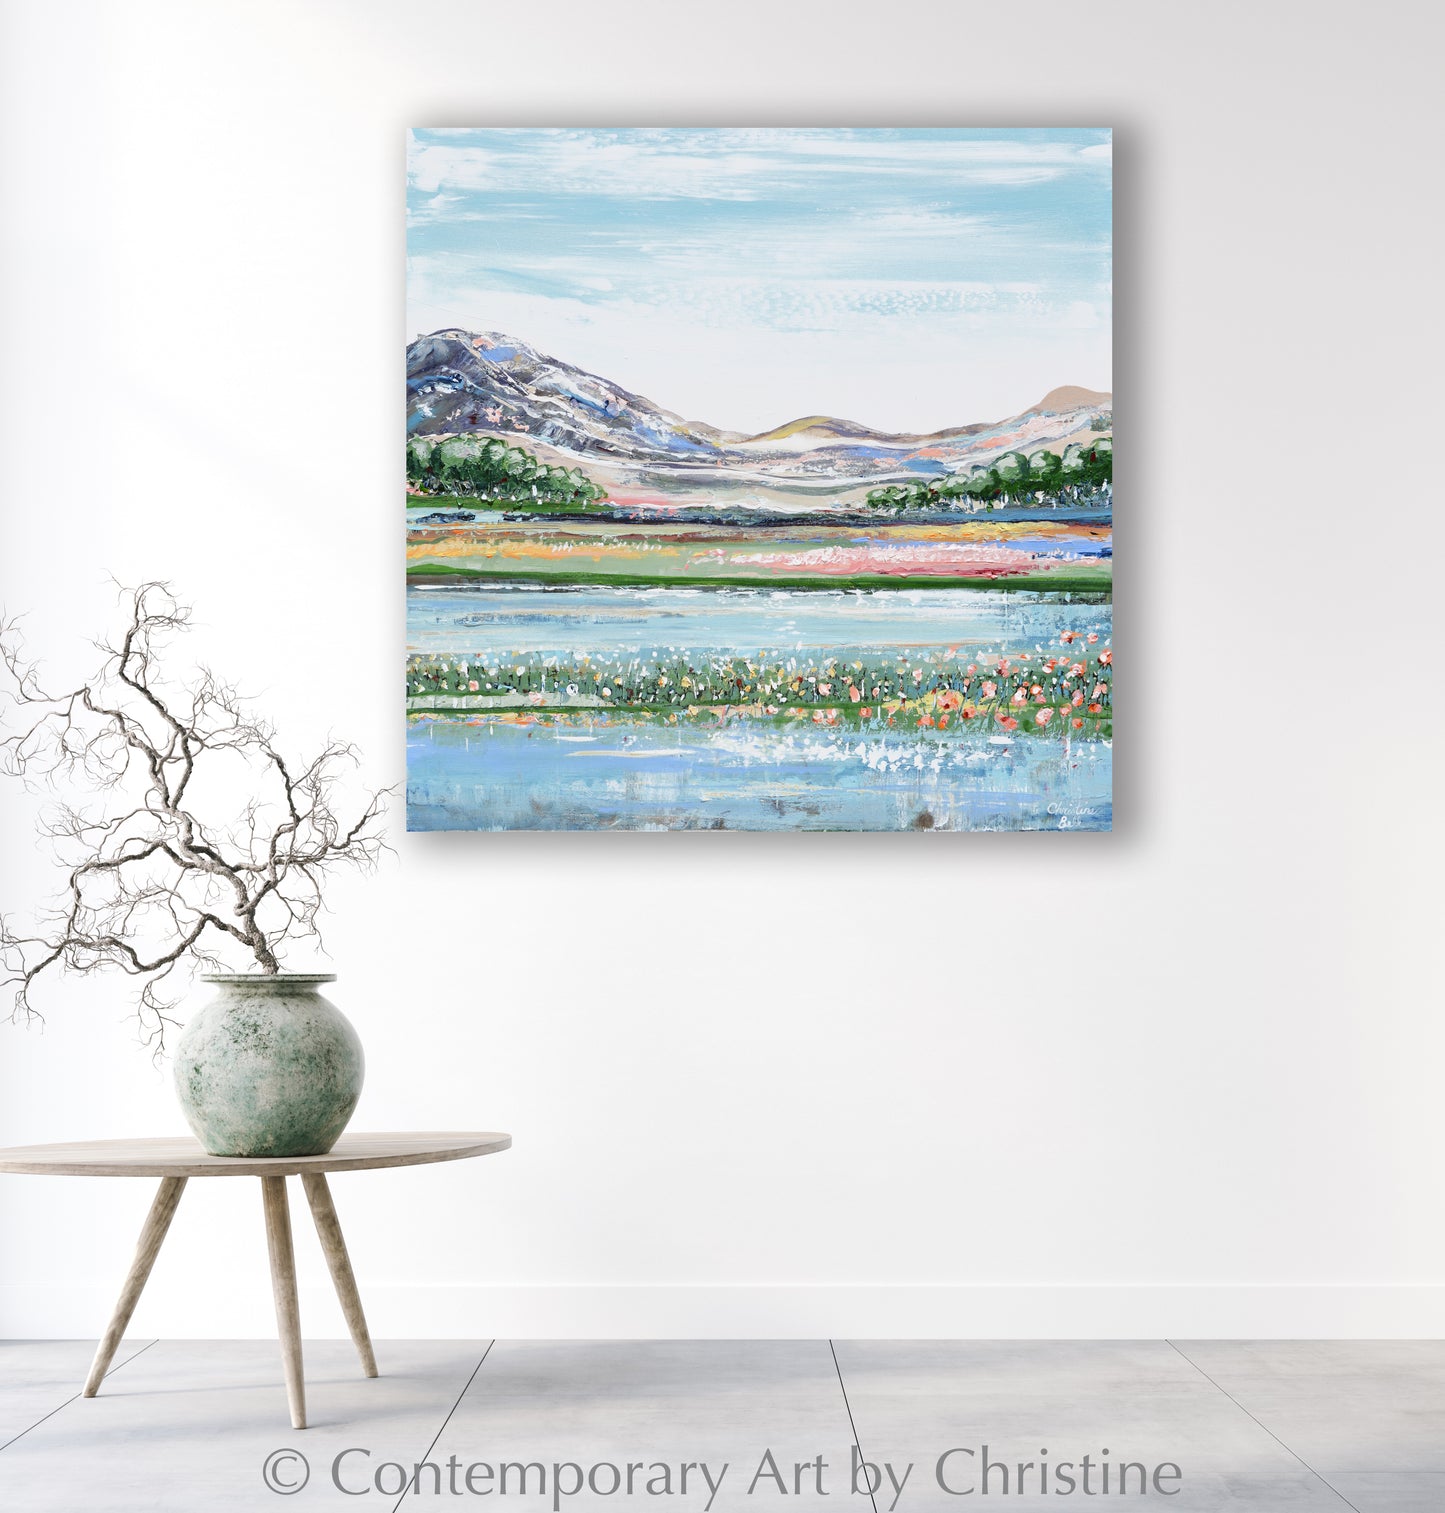 Textured Landscapes of Serenity I. - Paint It Easy